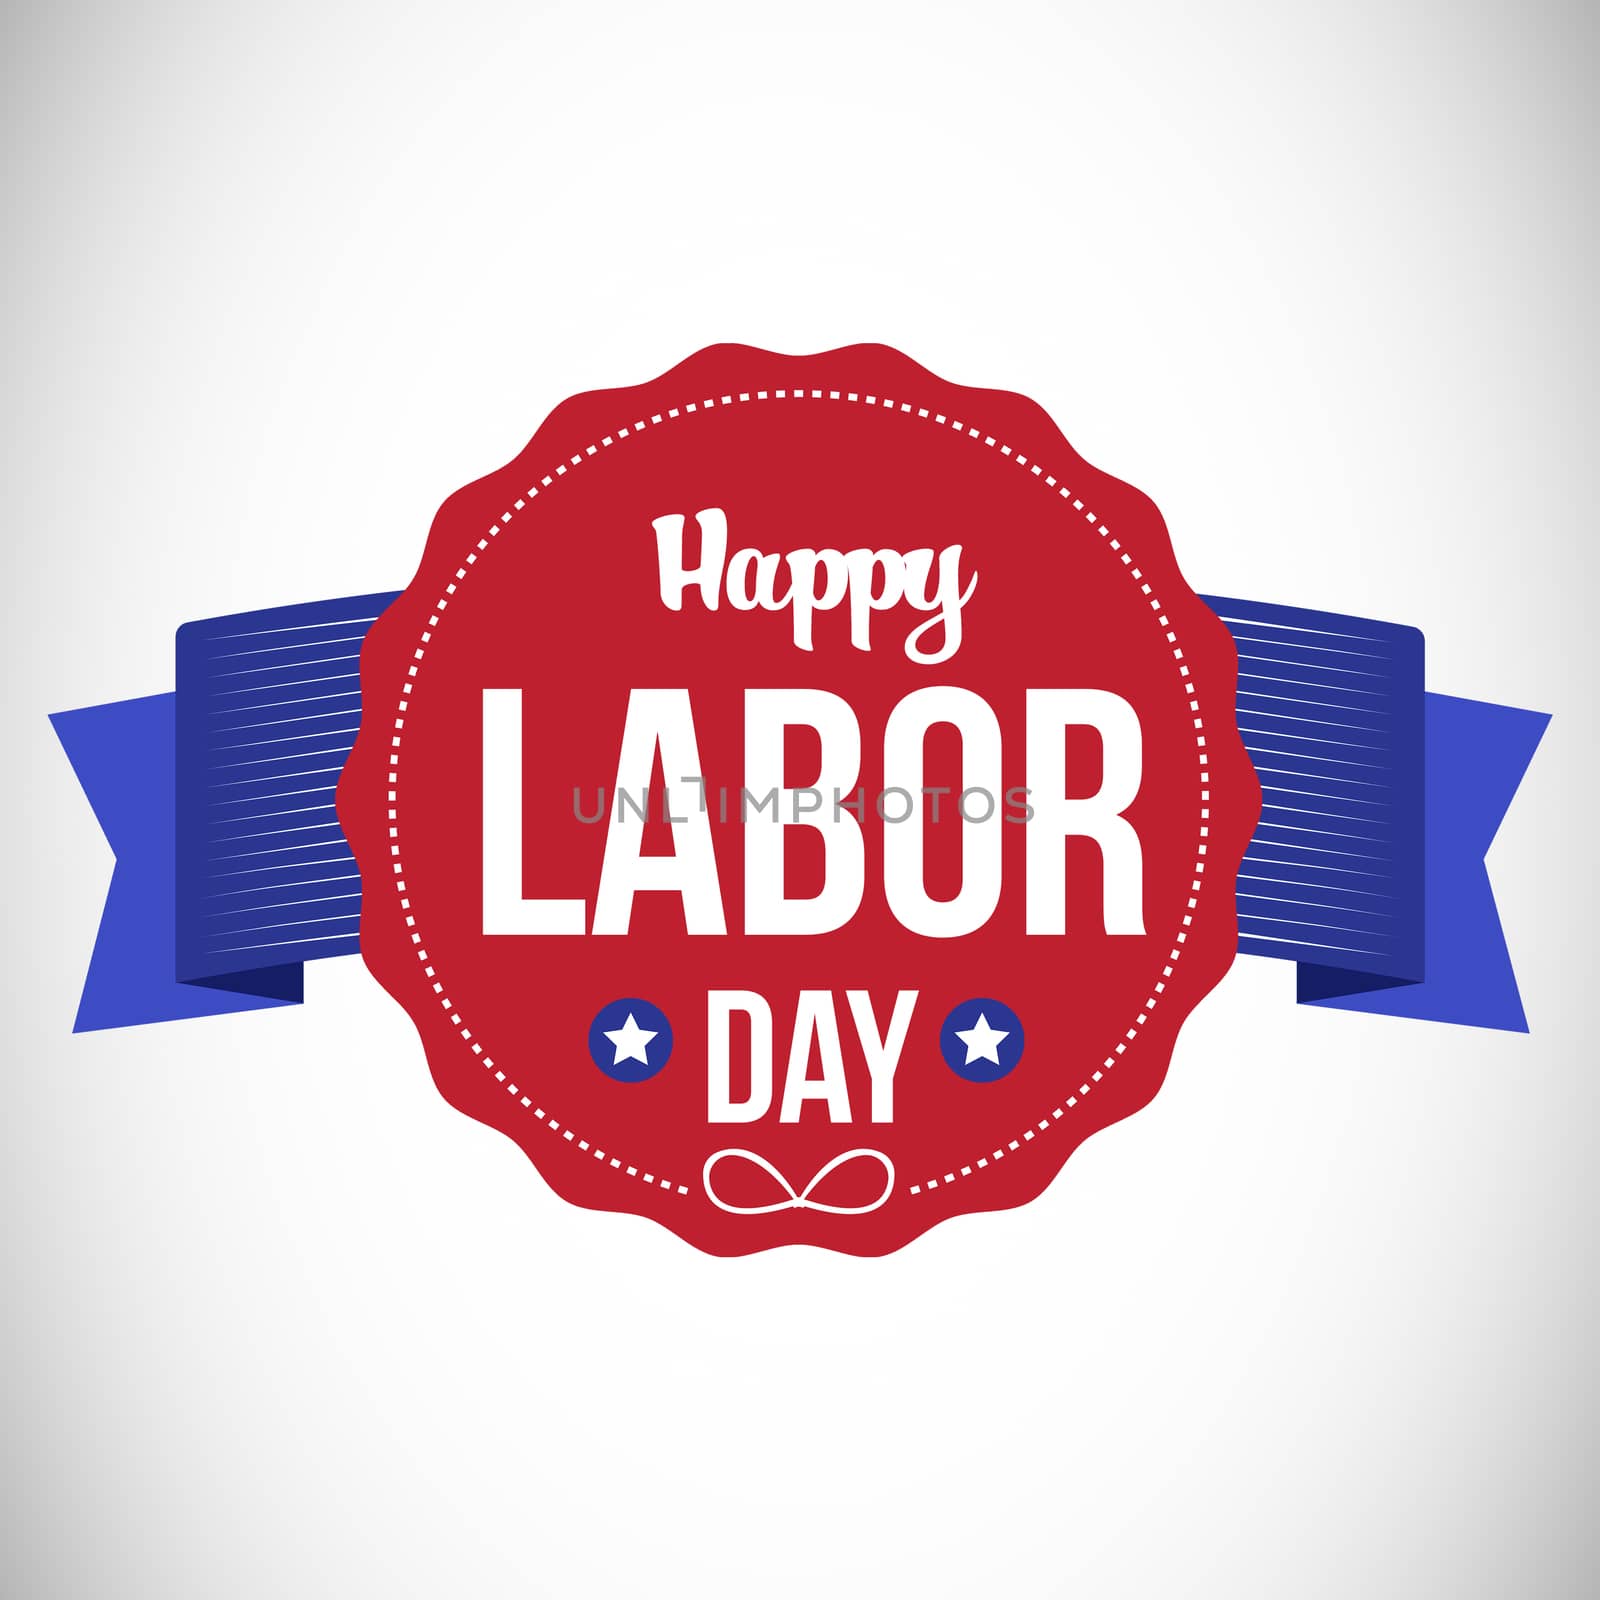 Happy labor day text in banner by Wavebreakmedia